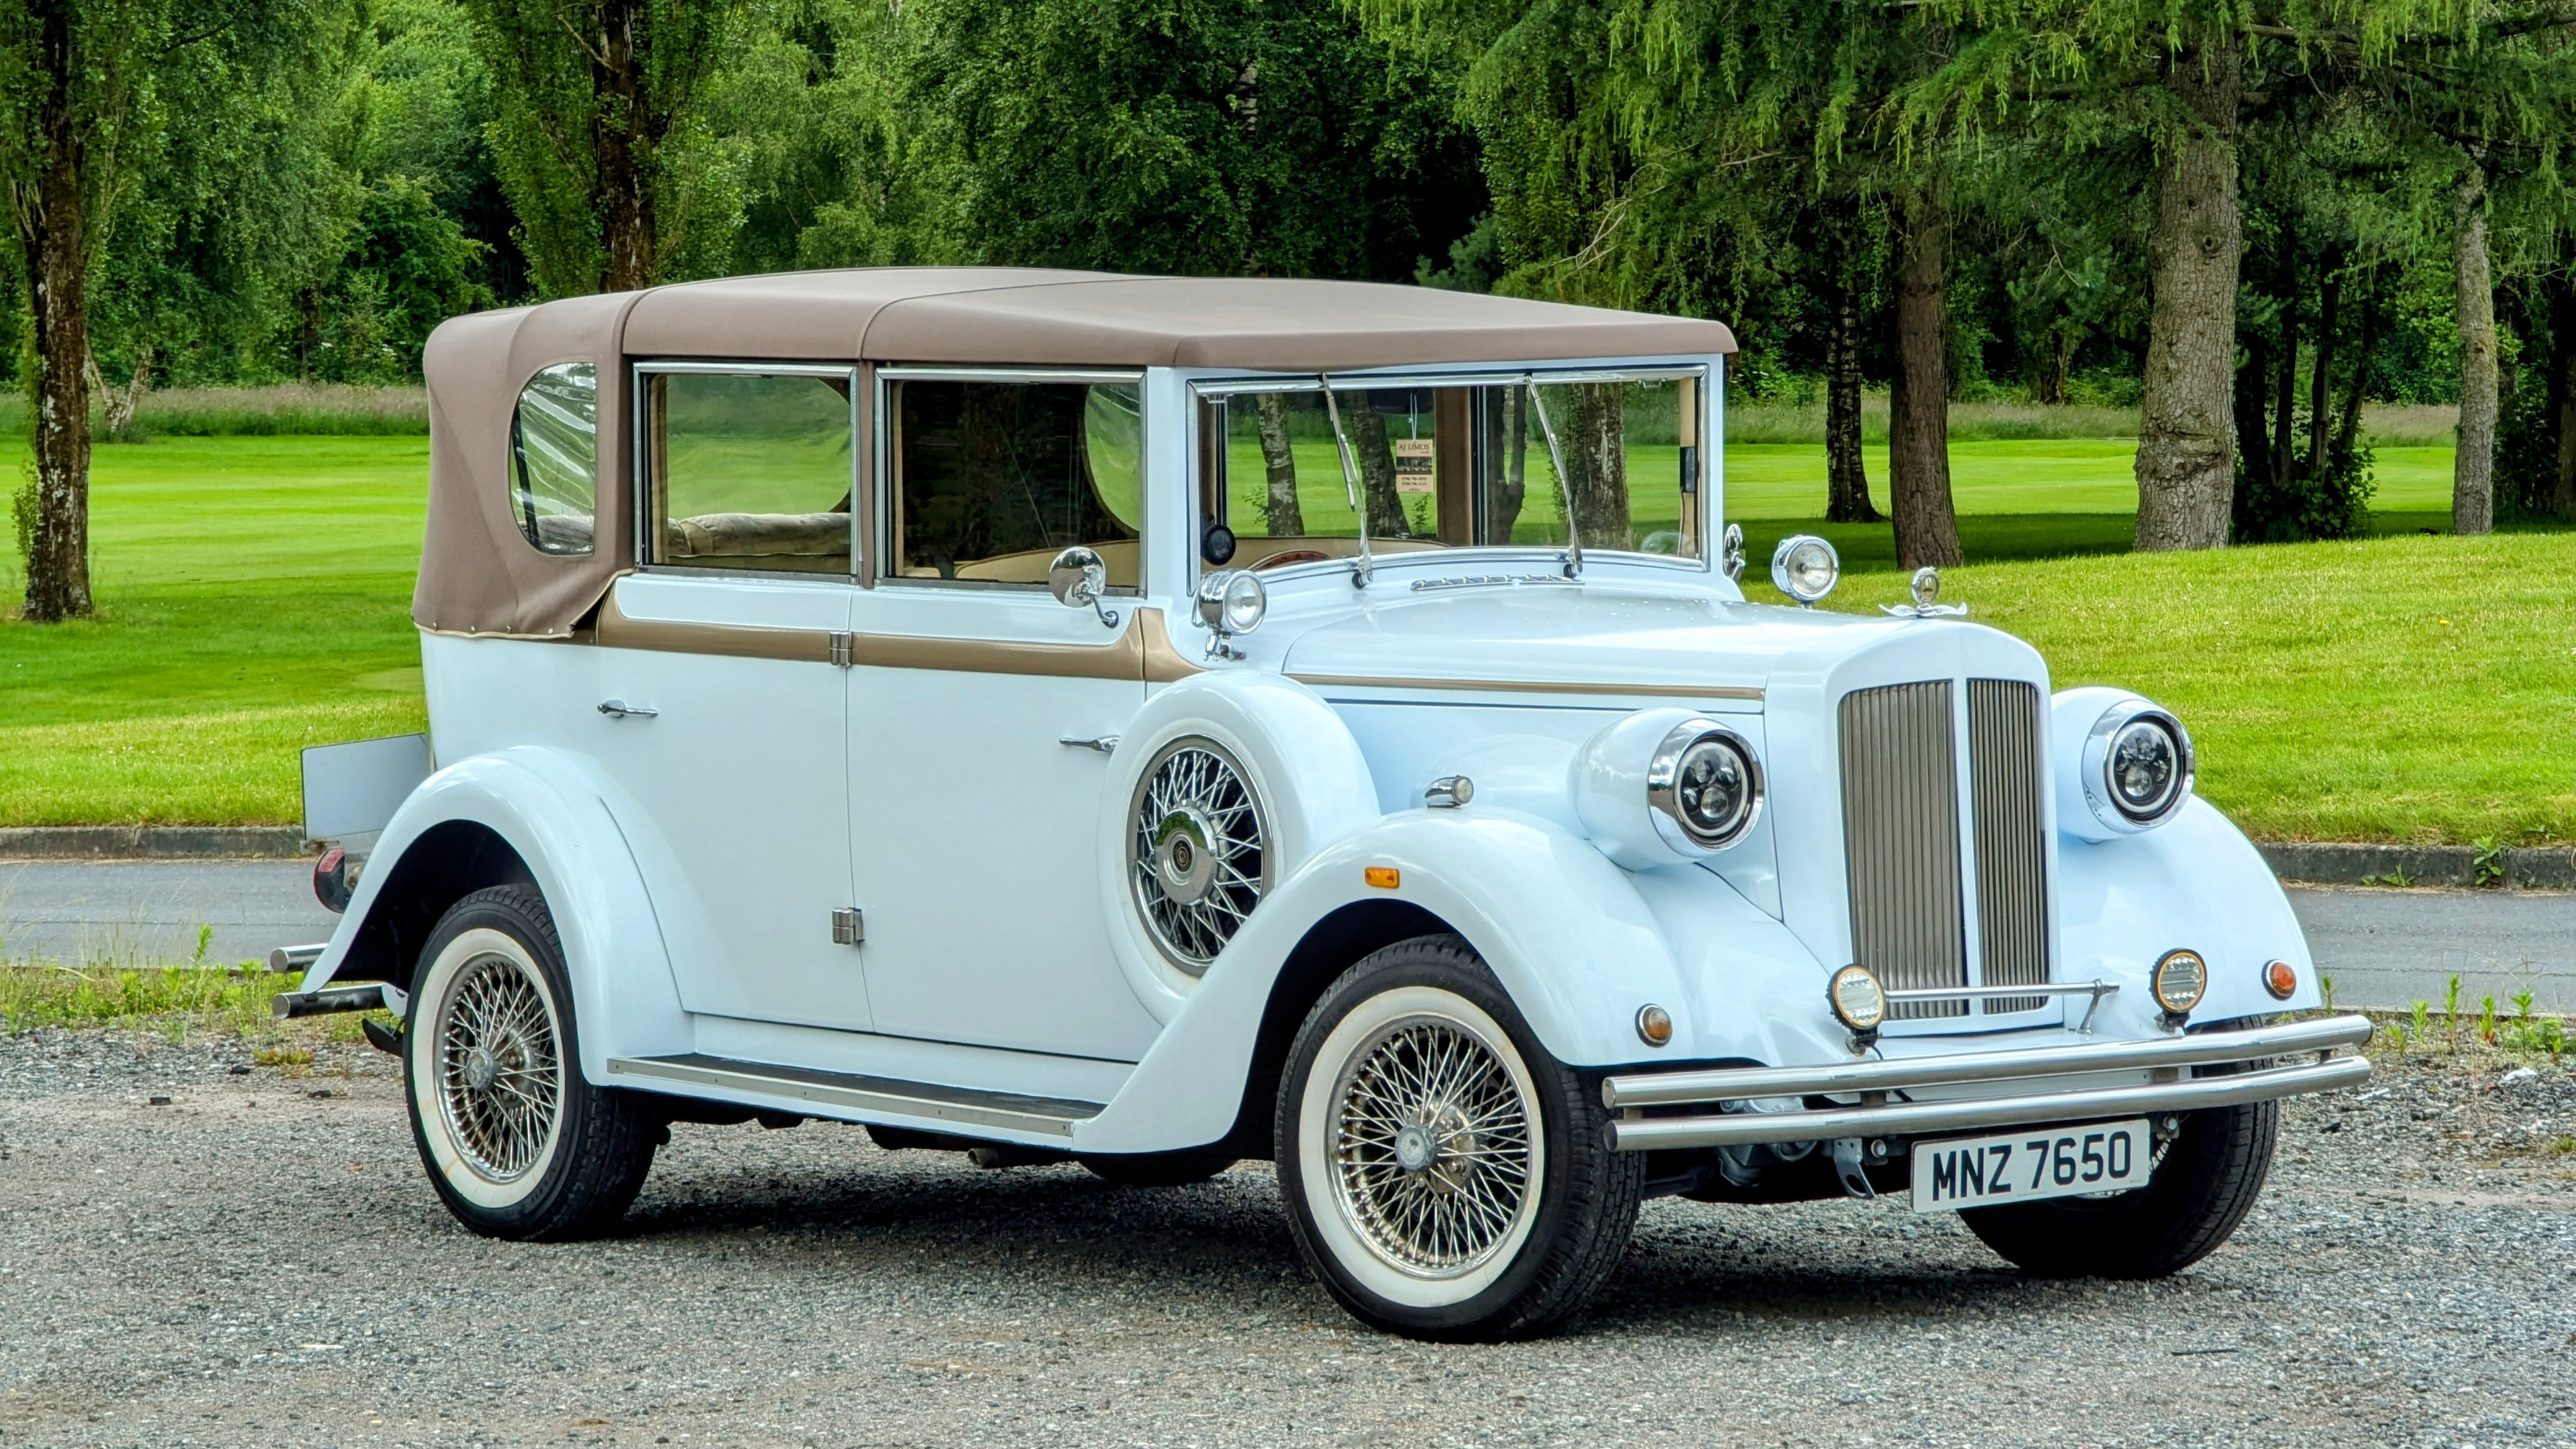 White Regent with Cream roof, white wall tires and side skirt spare mounted wheel